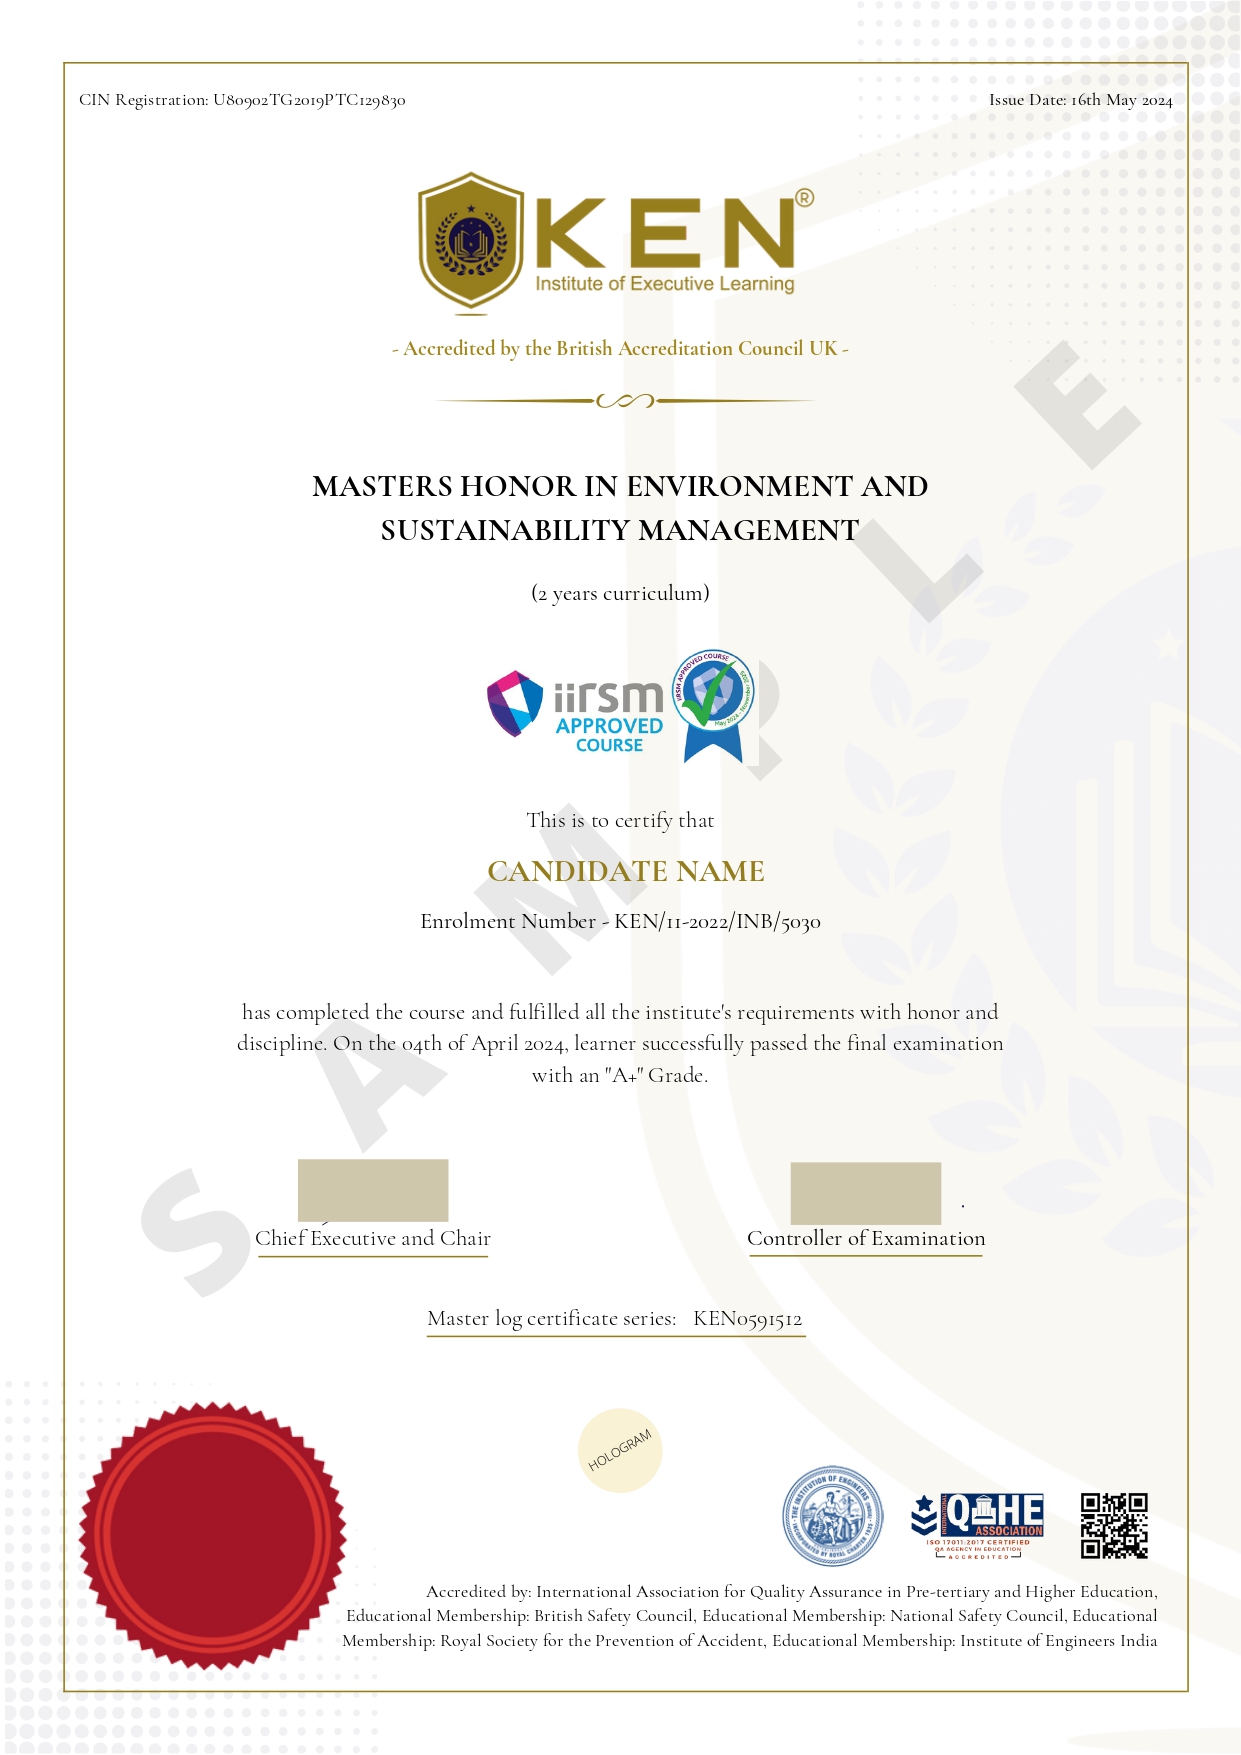 Master Honor in Environment and Sustainability Management